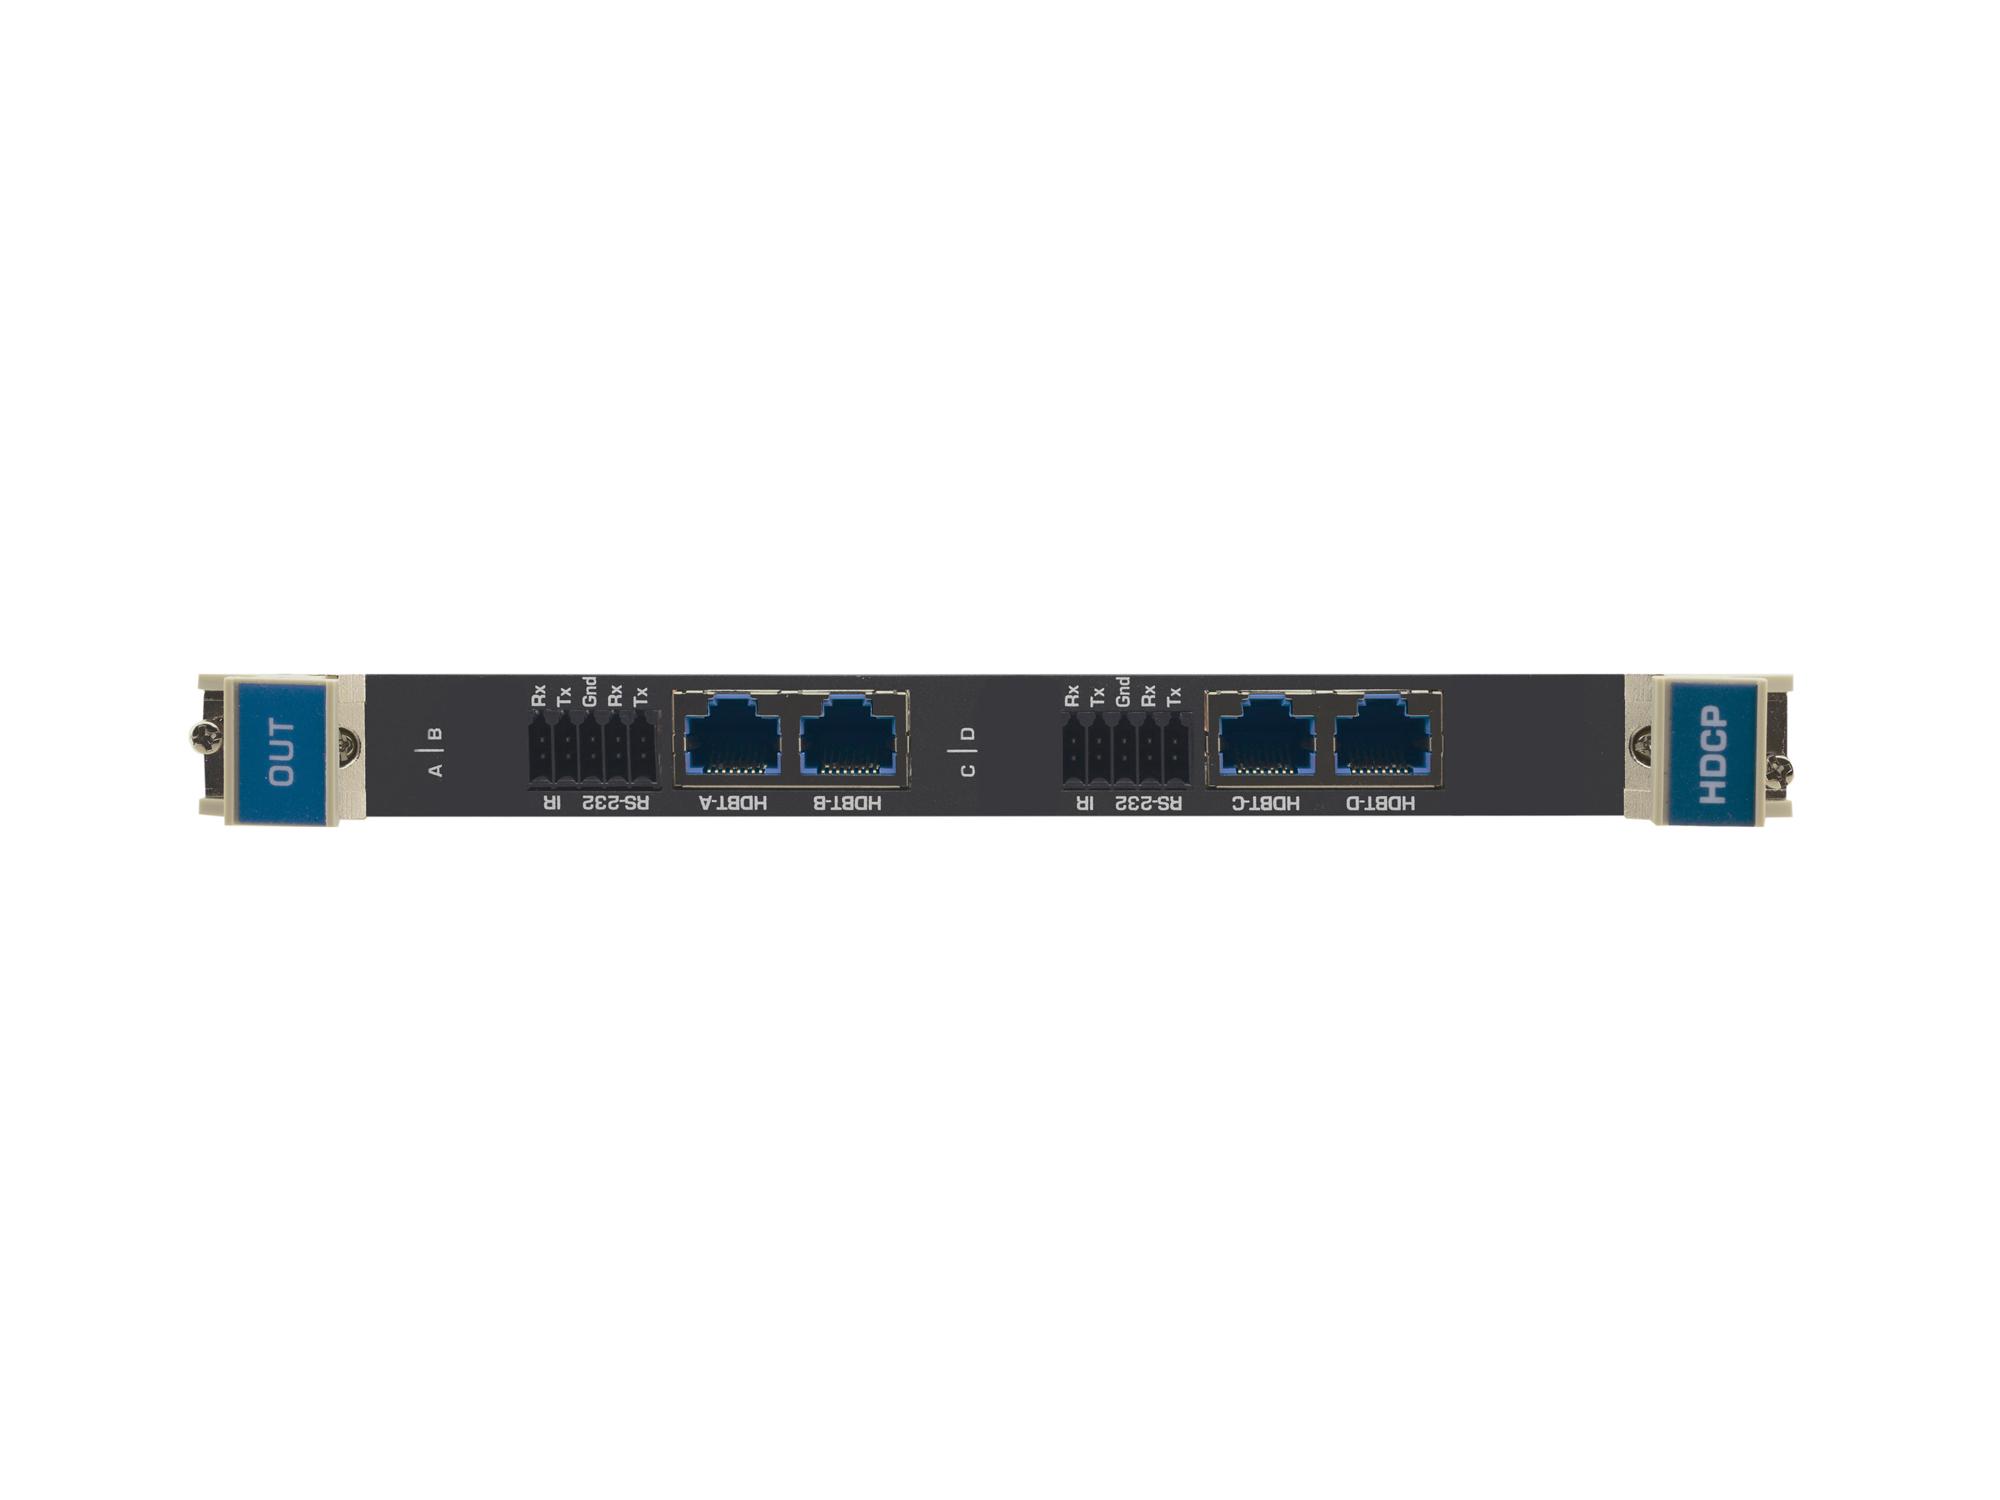 DT-OUT4-F32 4–Channel 4K60 HDMI over Long Reach HDBaseT Output Card by Kramer